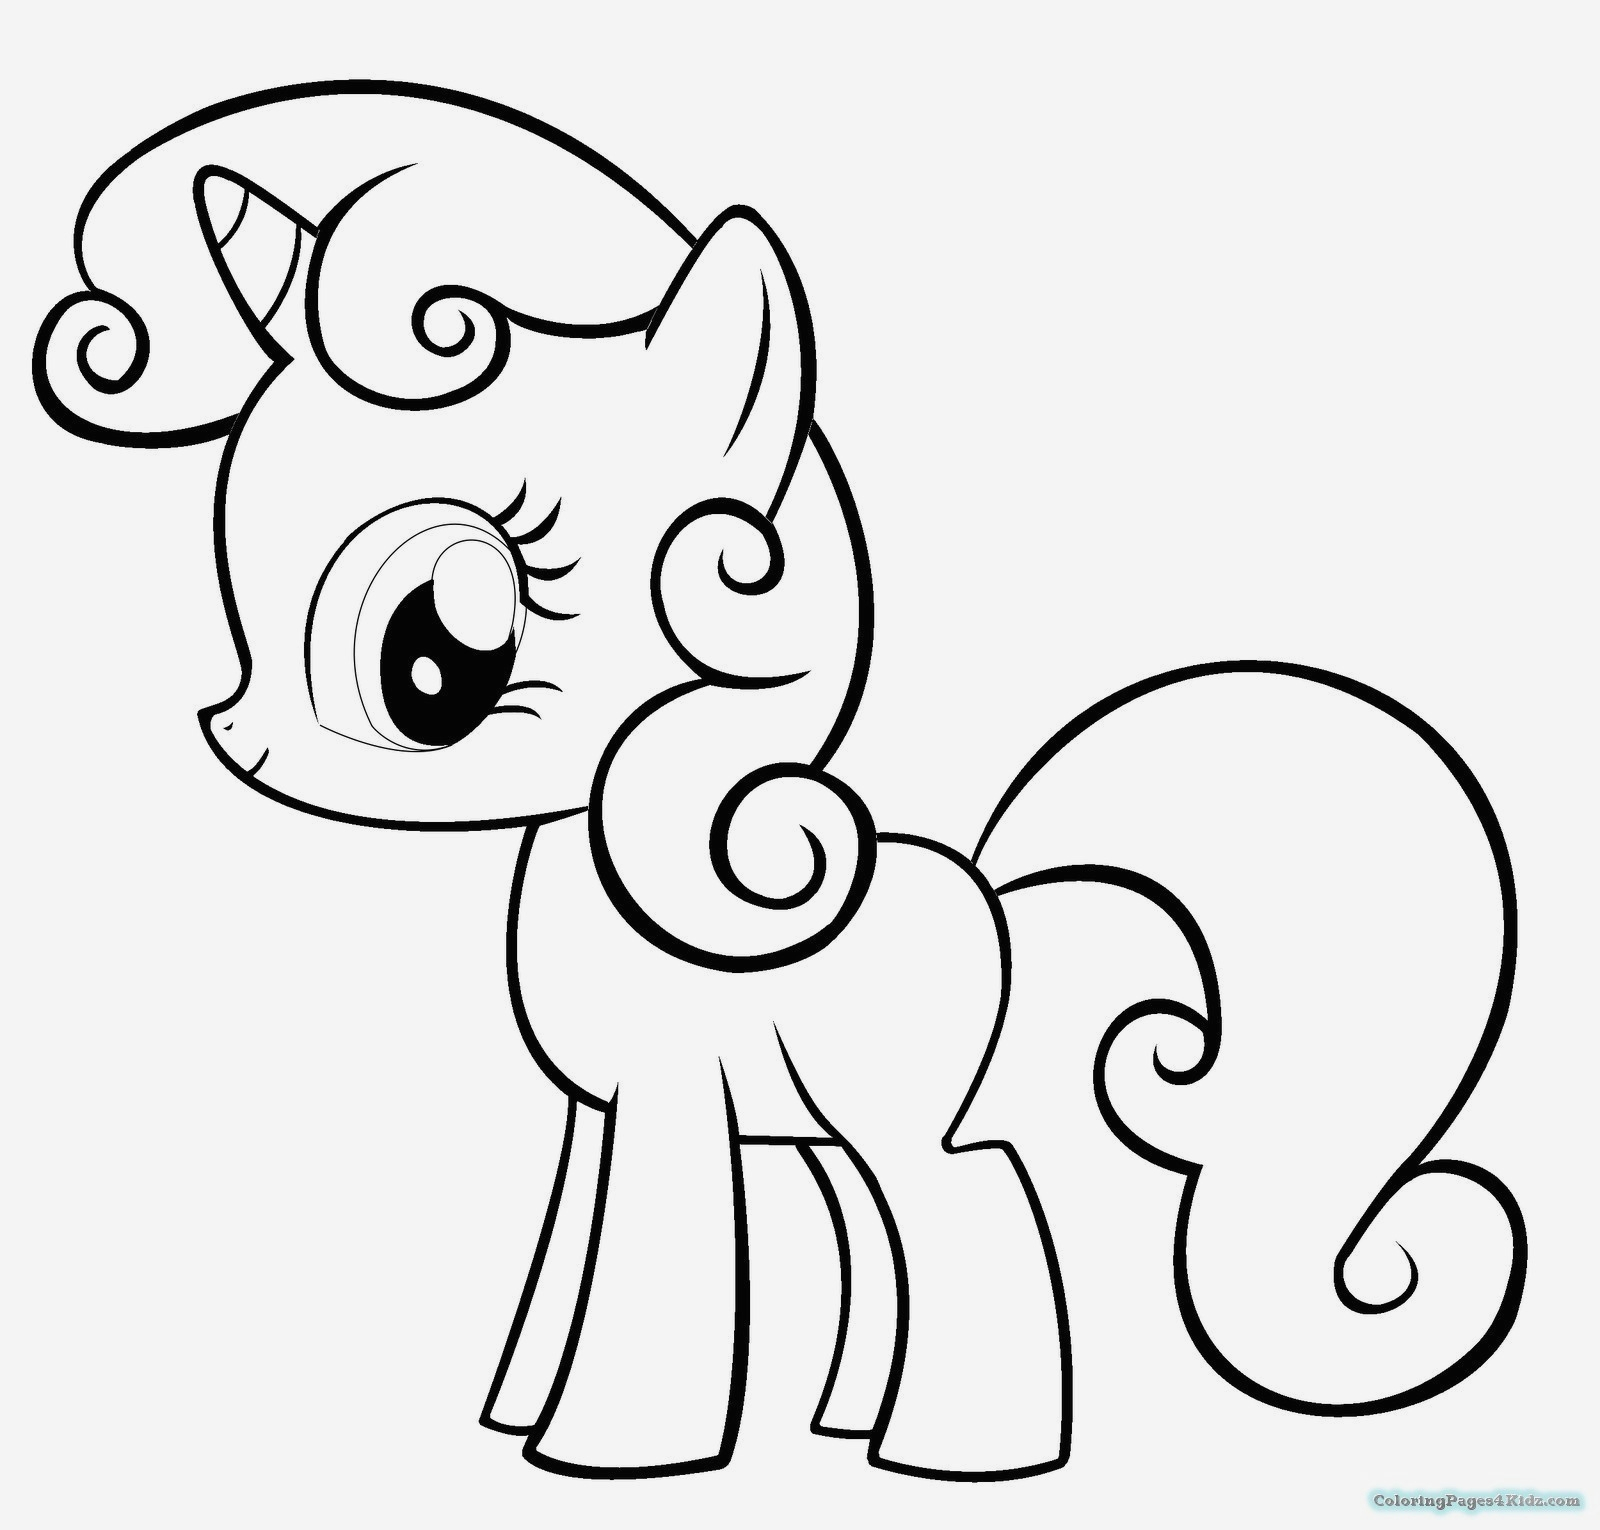 Mlp Coloring Pages Rarity 20 My Little Pony Coloring Pages To Print Gallery Coloring Sheets